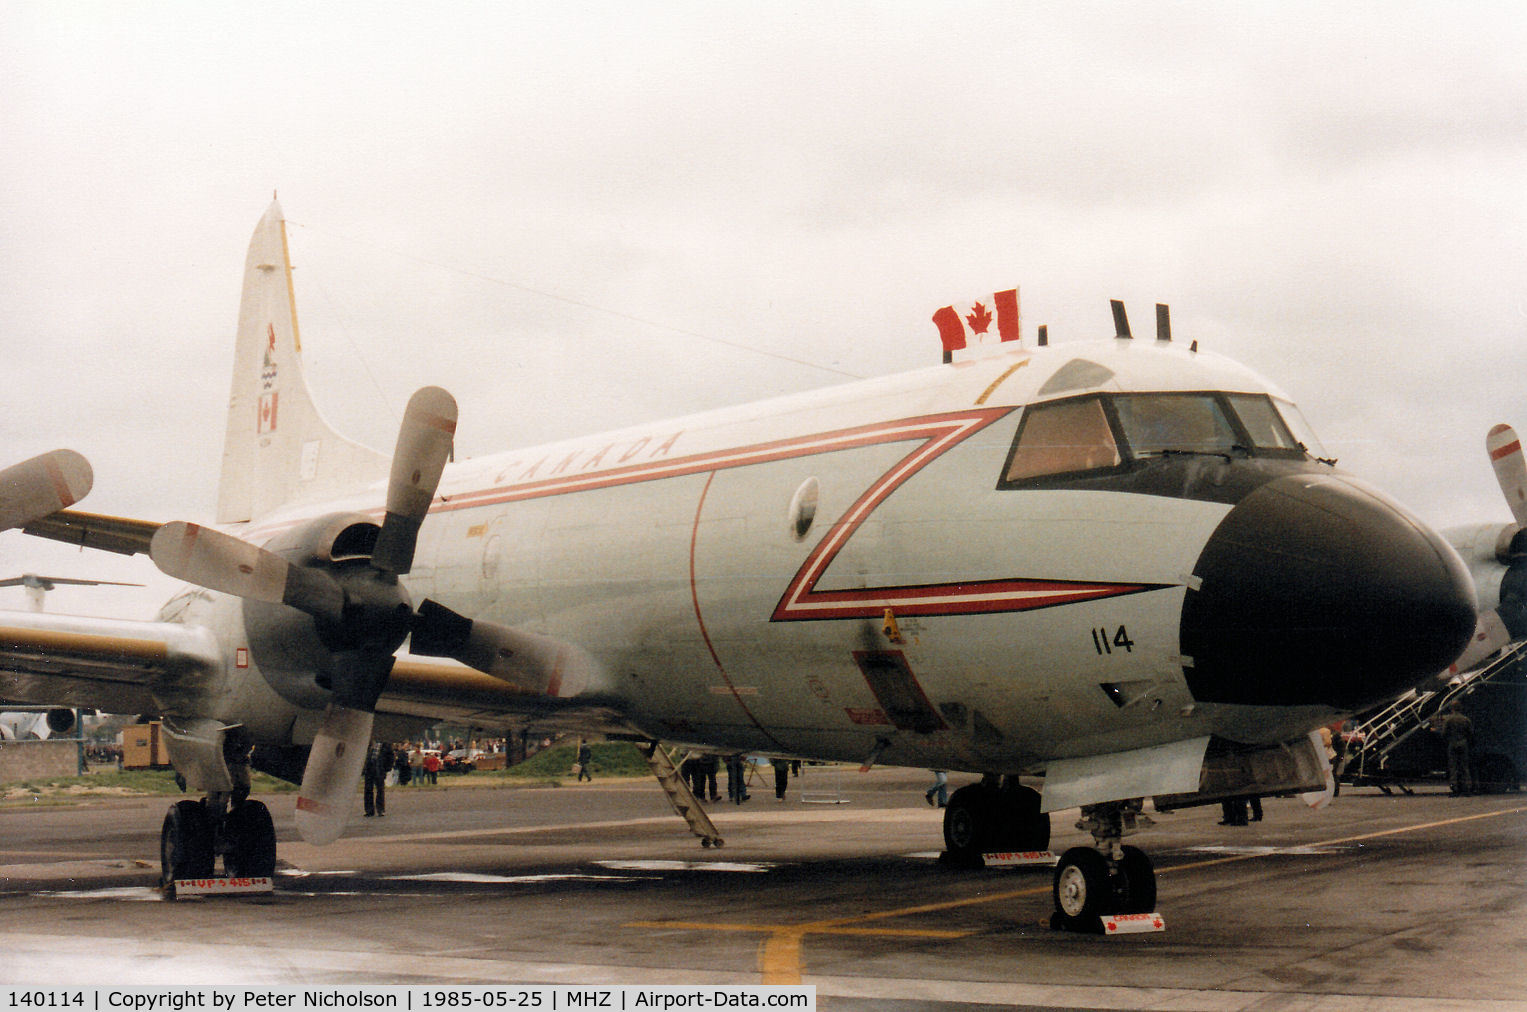 140114, 1981 Lockheed CP-140 Aurora C/N 285B-5719, CP-140 Aurora of 415 Squadron Canadian Armed Forces on display at the 1985 RAF Mildenhall Air Fete.